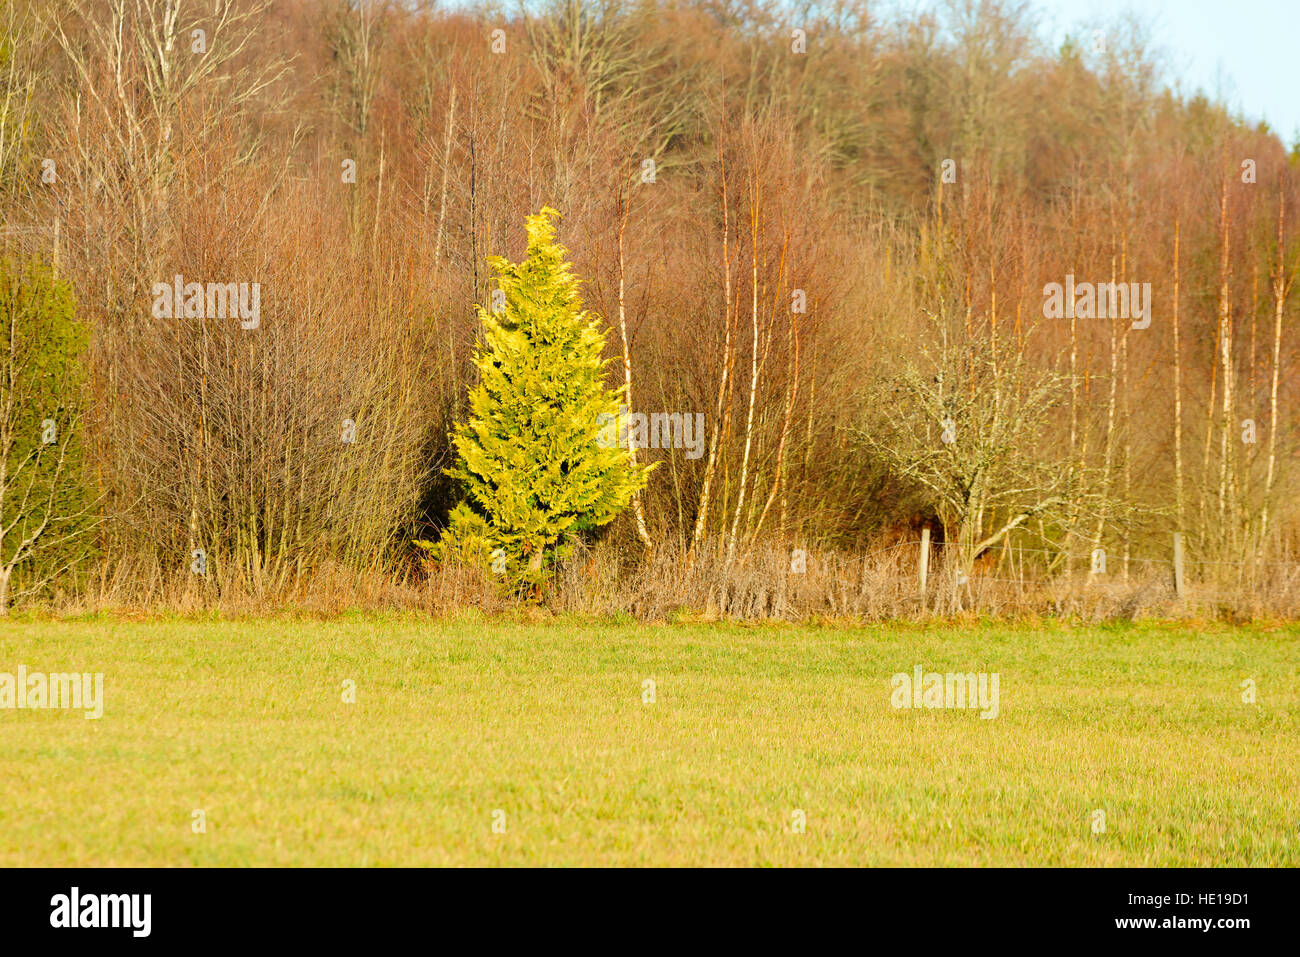 Thuja tree cultivar clearly visible among other trees in the outskirts of the forest. Stock Photo